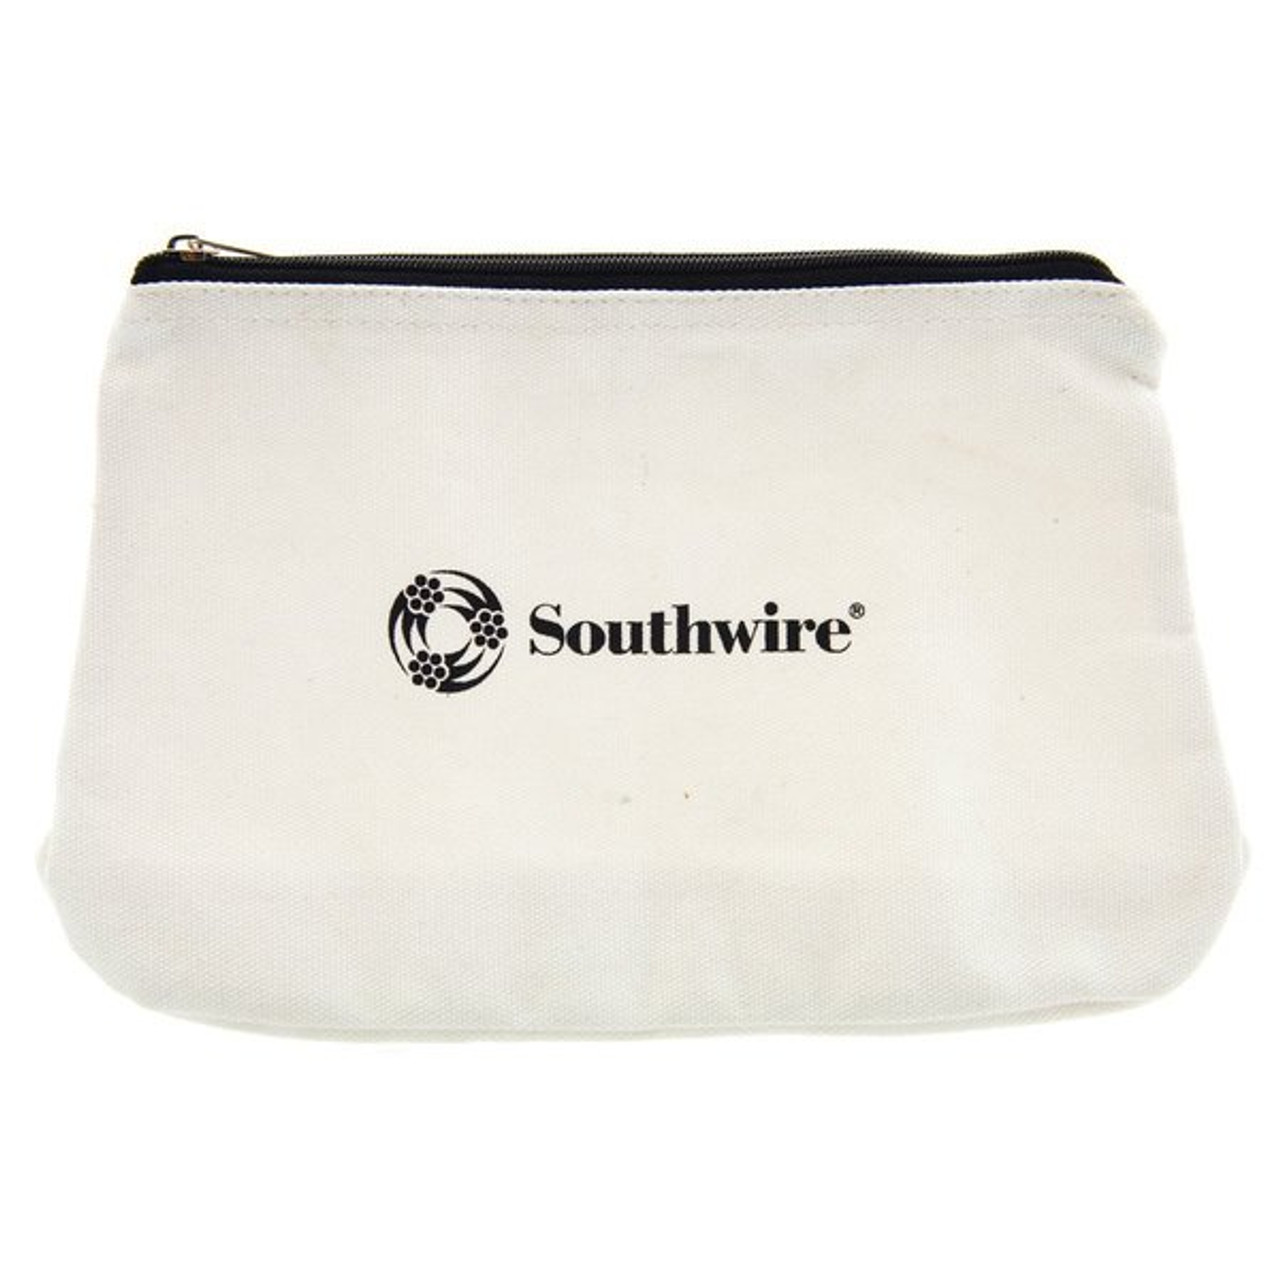 Southwire 58282840 Canvas Zipper Bag 12In, Canvas - www